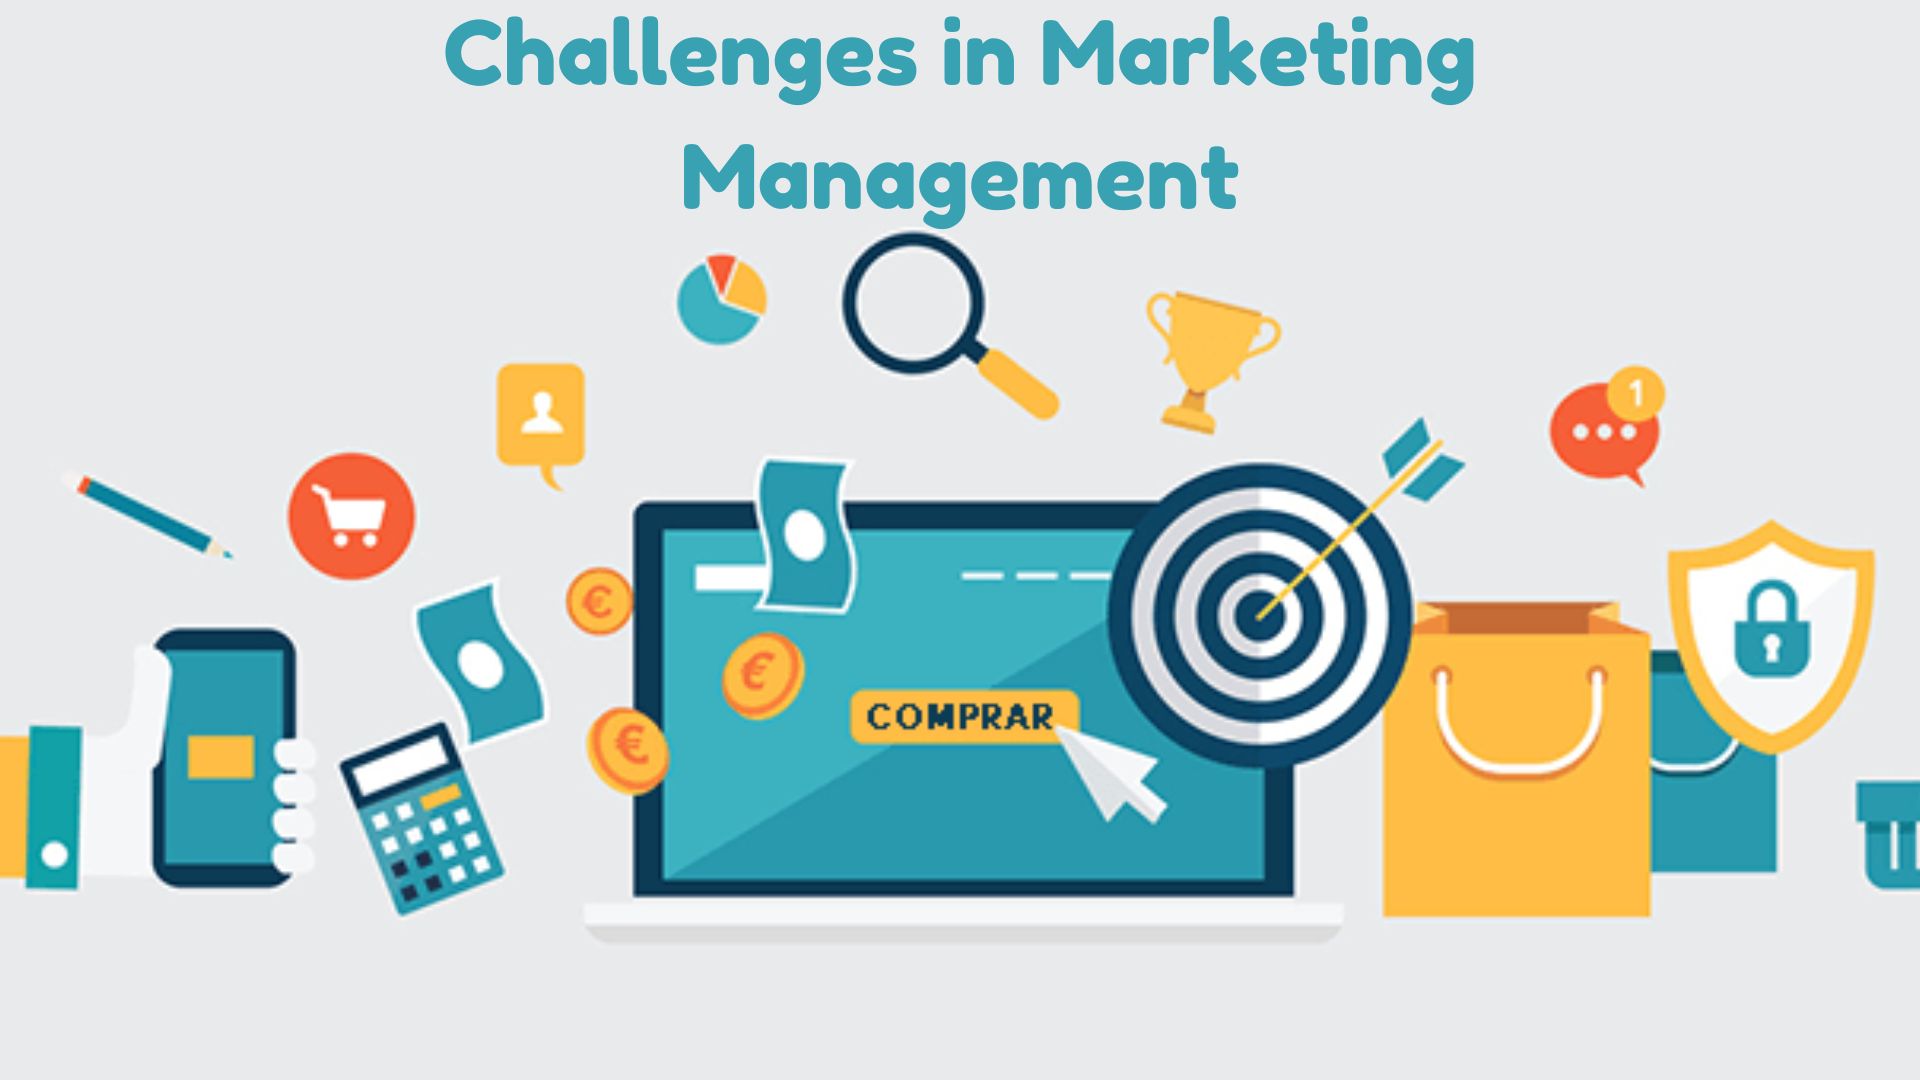 Challenges Faced in Marketing Management